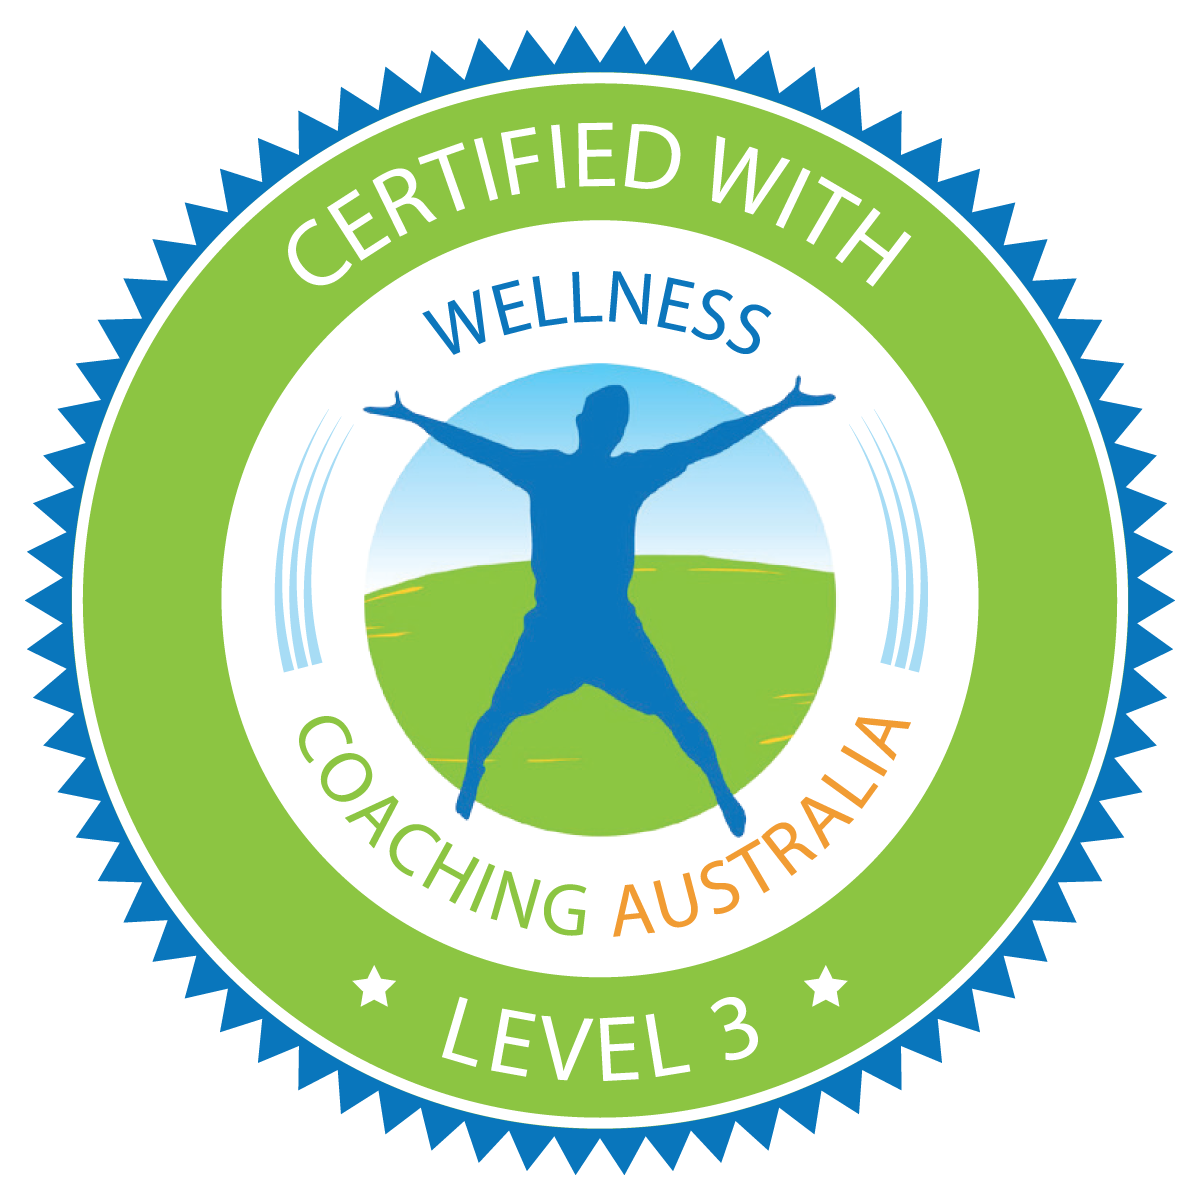 Michelle_Winrow_the_authentic_wellness_coach_wellbeing_coaching_byron_bay_Wellness_Coaching_Australia_certifed_health_professional